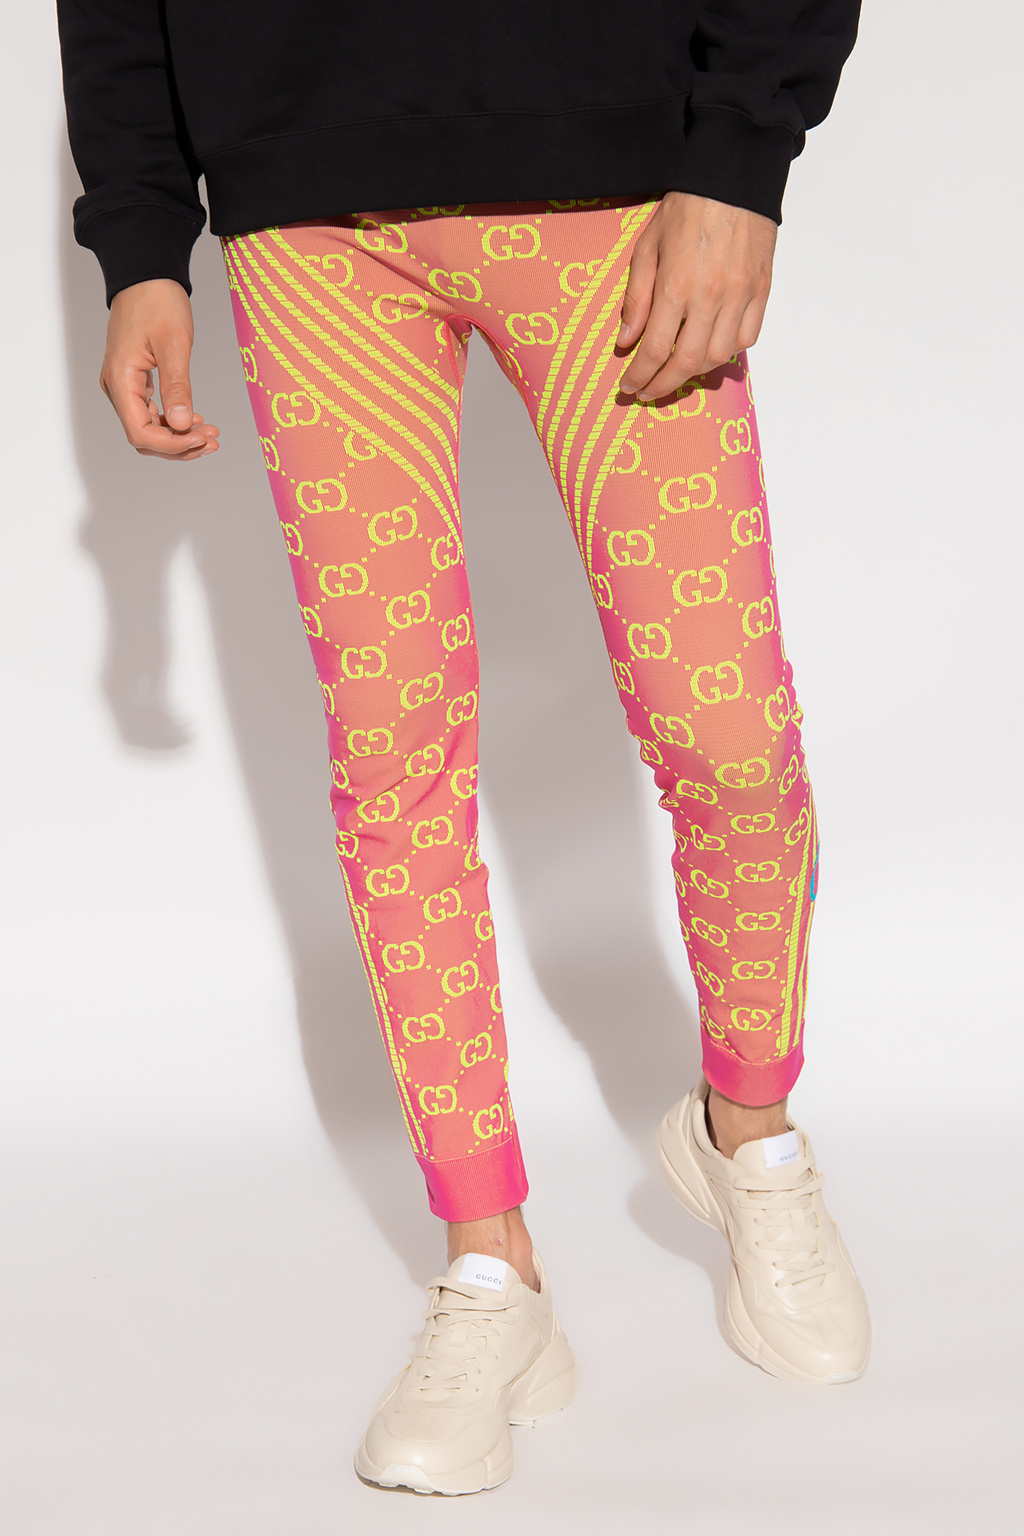 Gucci Leggings with 'GG' pattern, StclaircomoShops, Men's Clothing